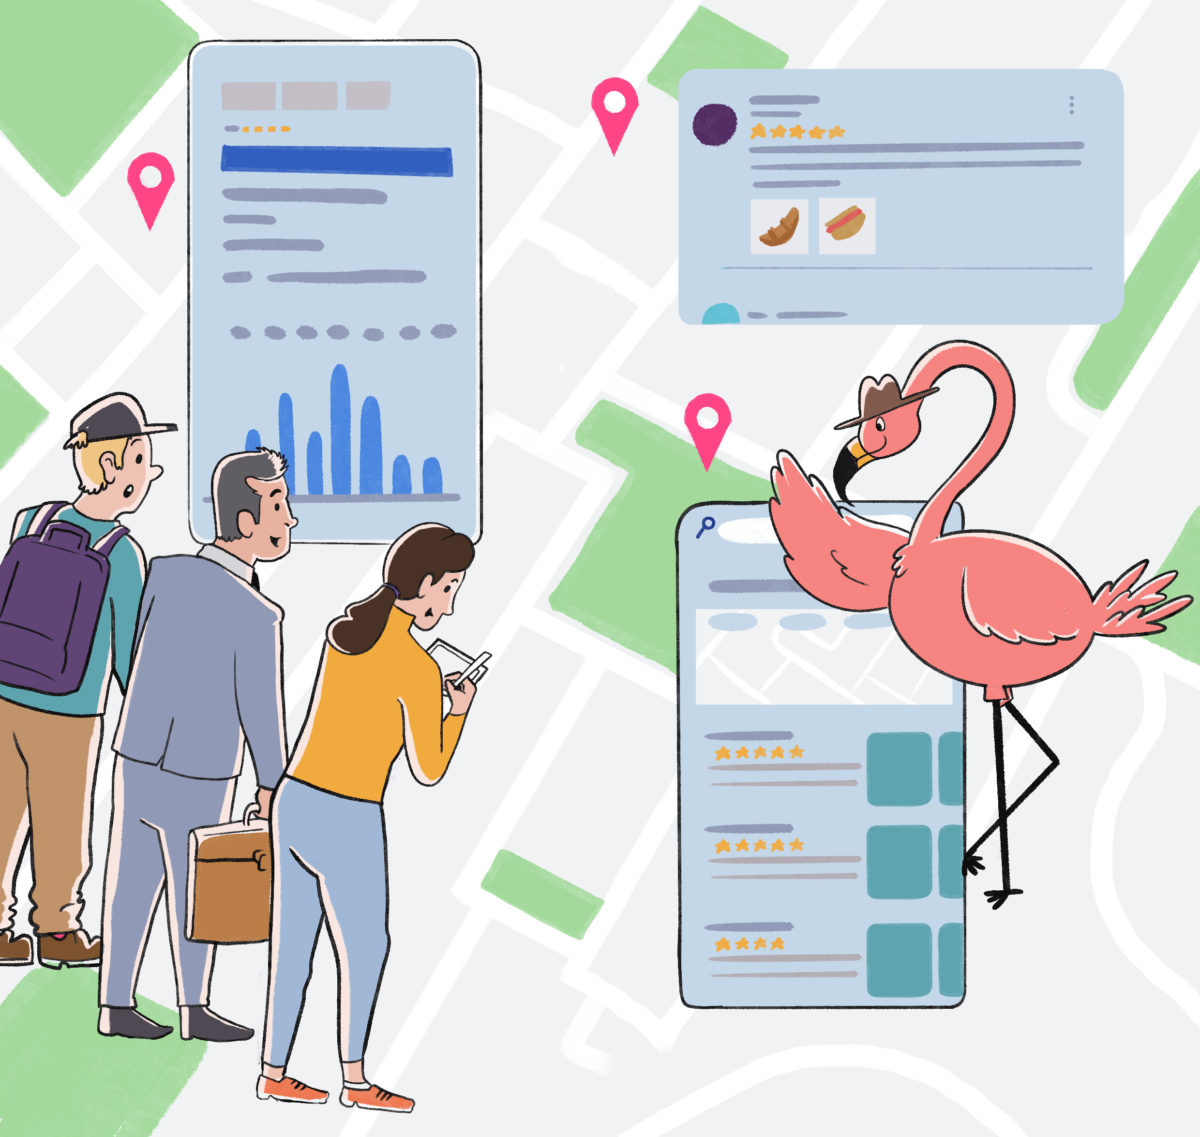 potential customers looking for a local business and seeing a flamingo in the google map pack results